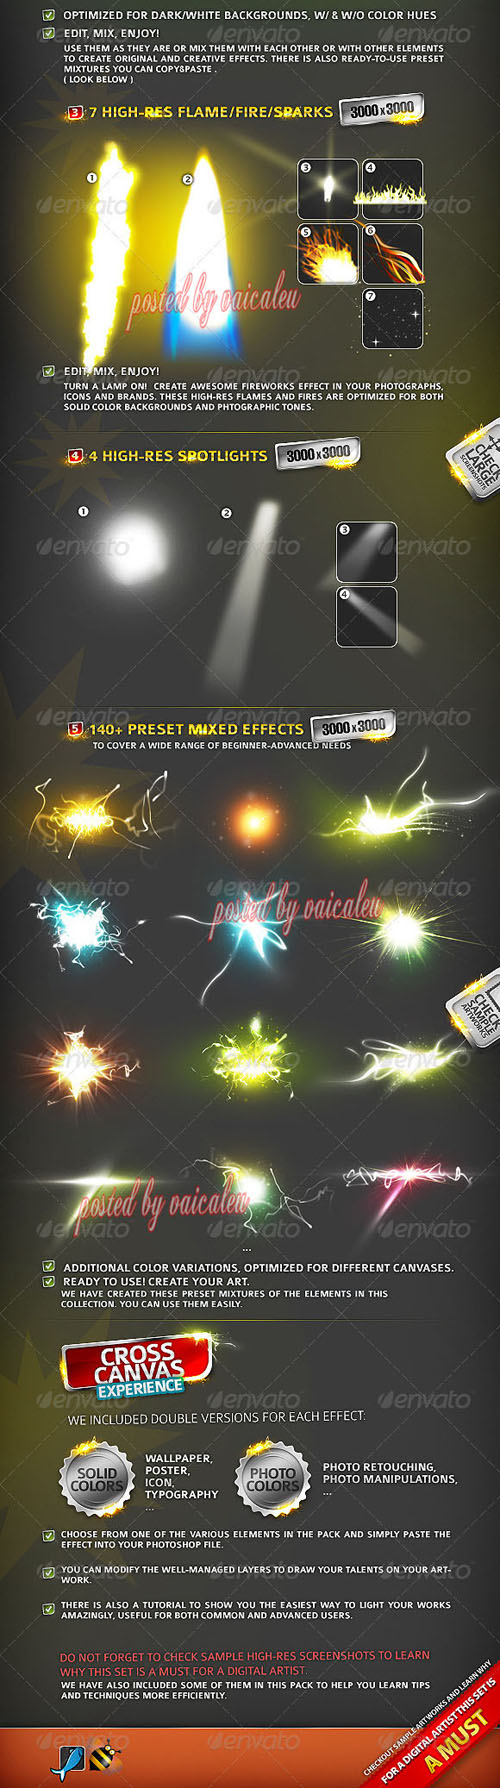 Lifetime Light Awesomizers Effects Collection | 665.91 MB